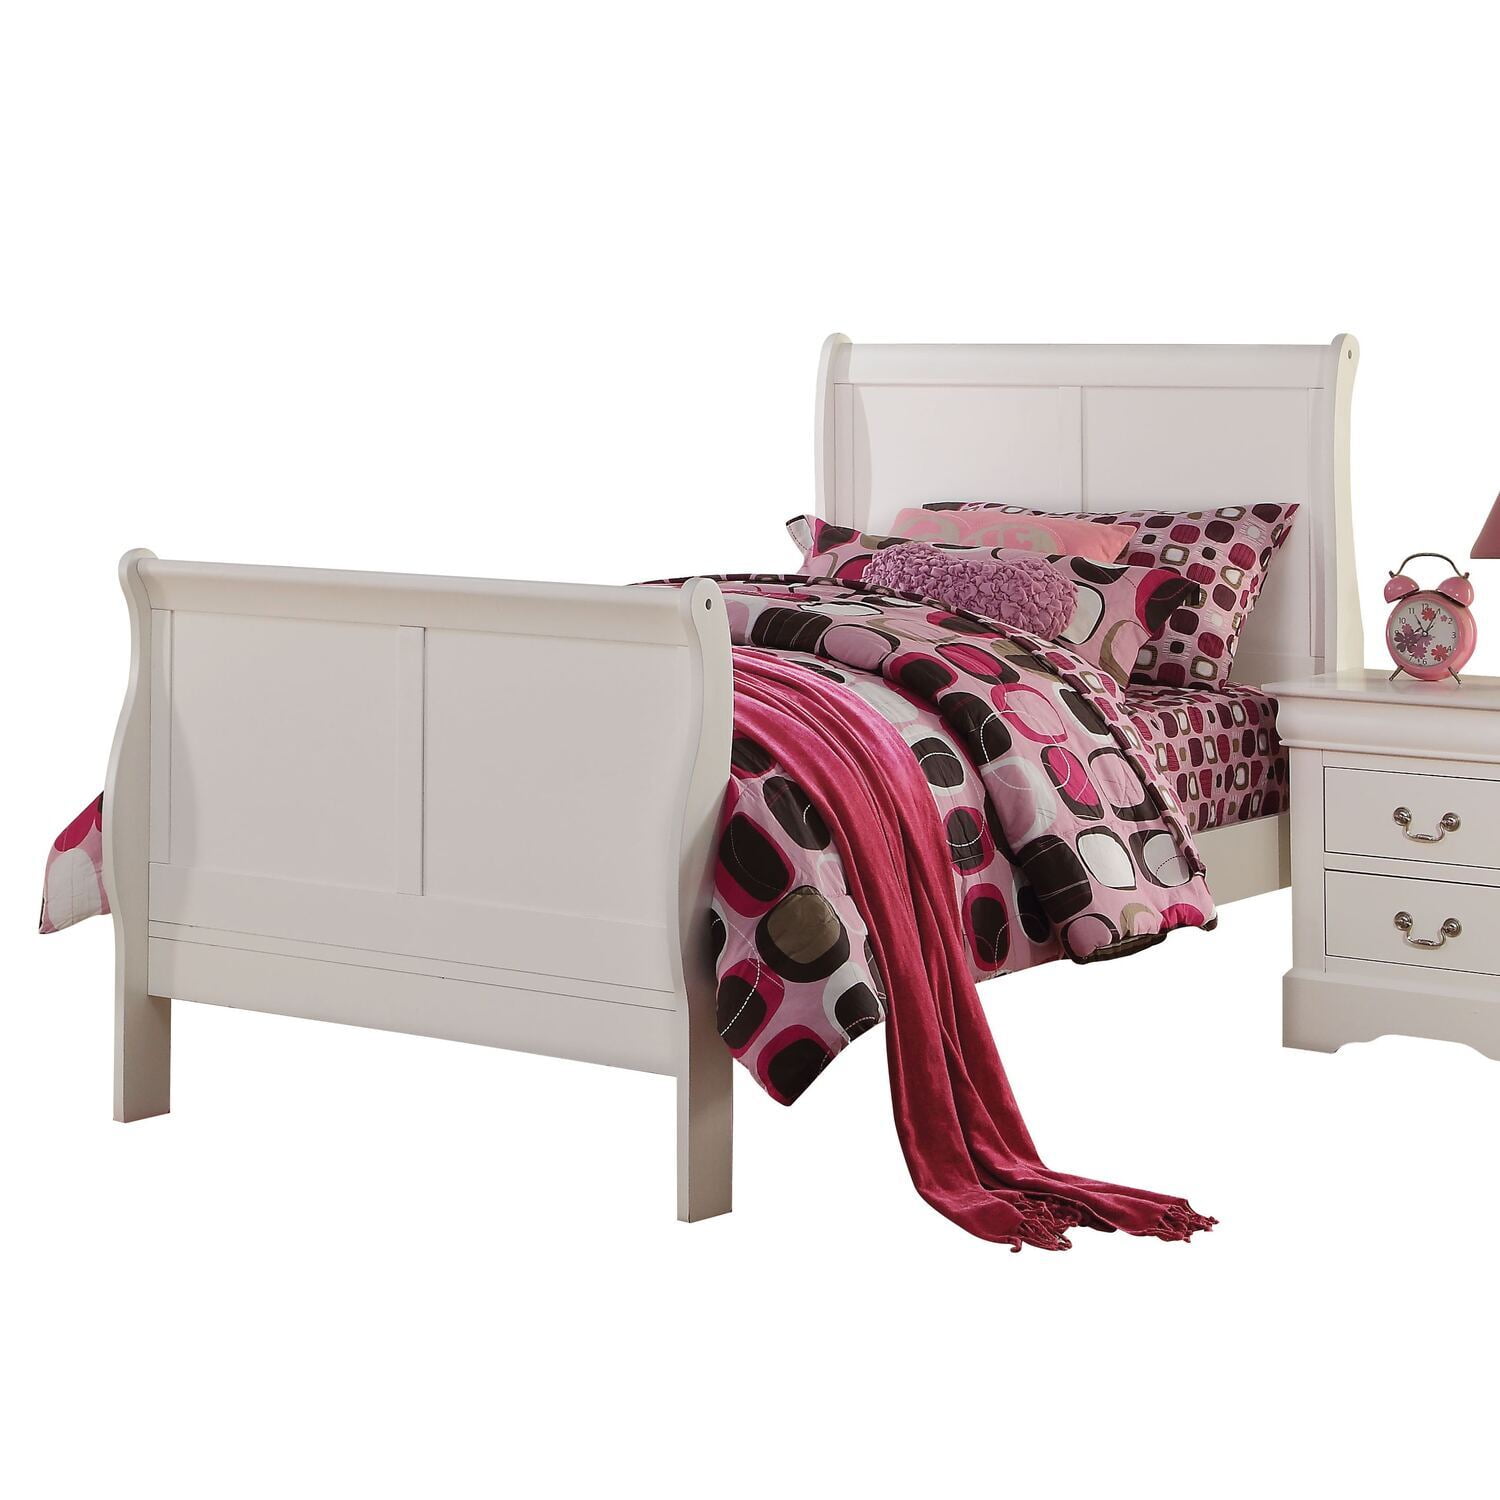 Picture of ACME 24510F Louis Philippe III Full Size Bed, White - 2 Piece